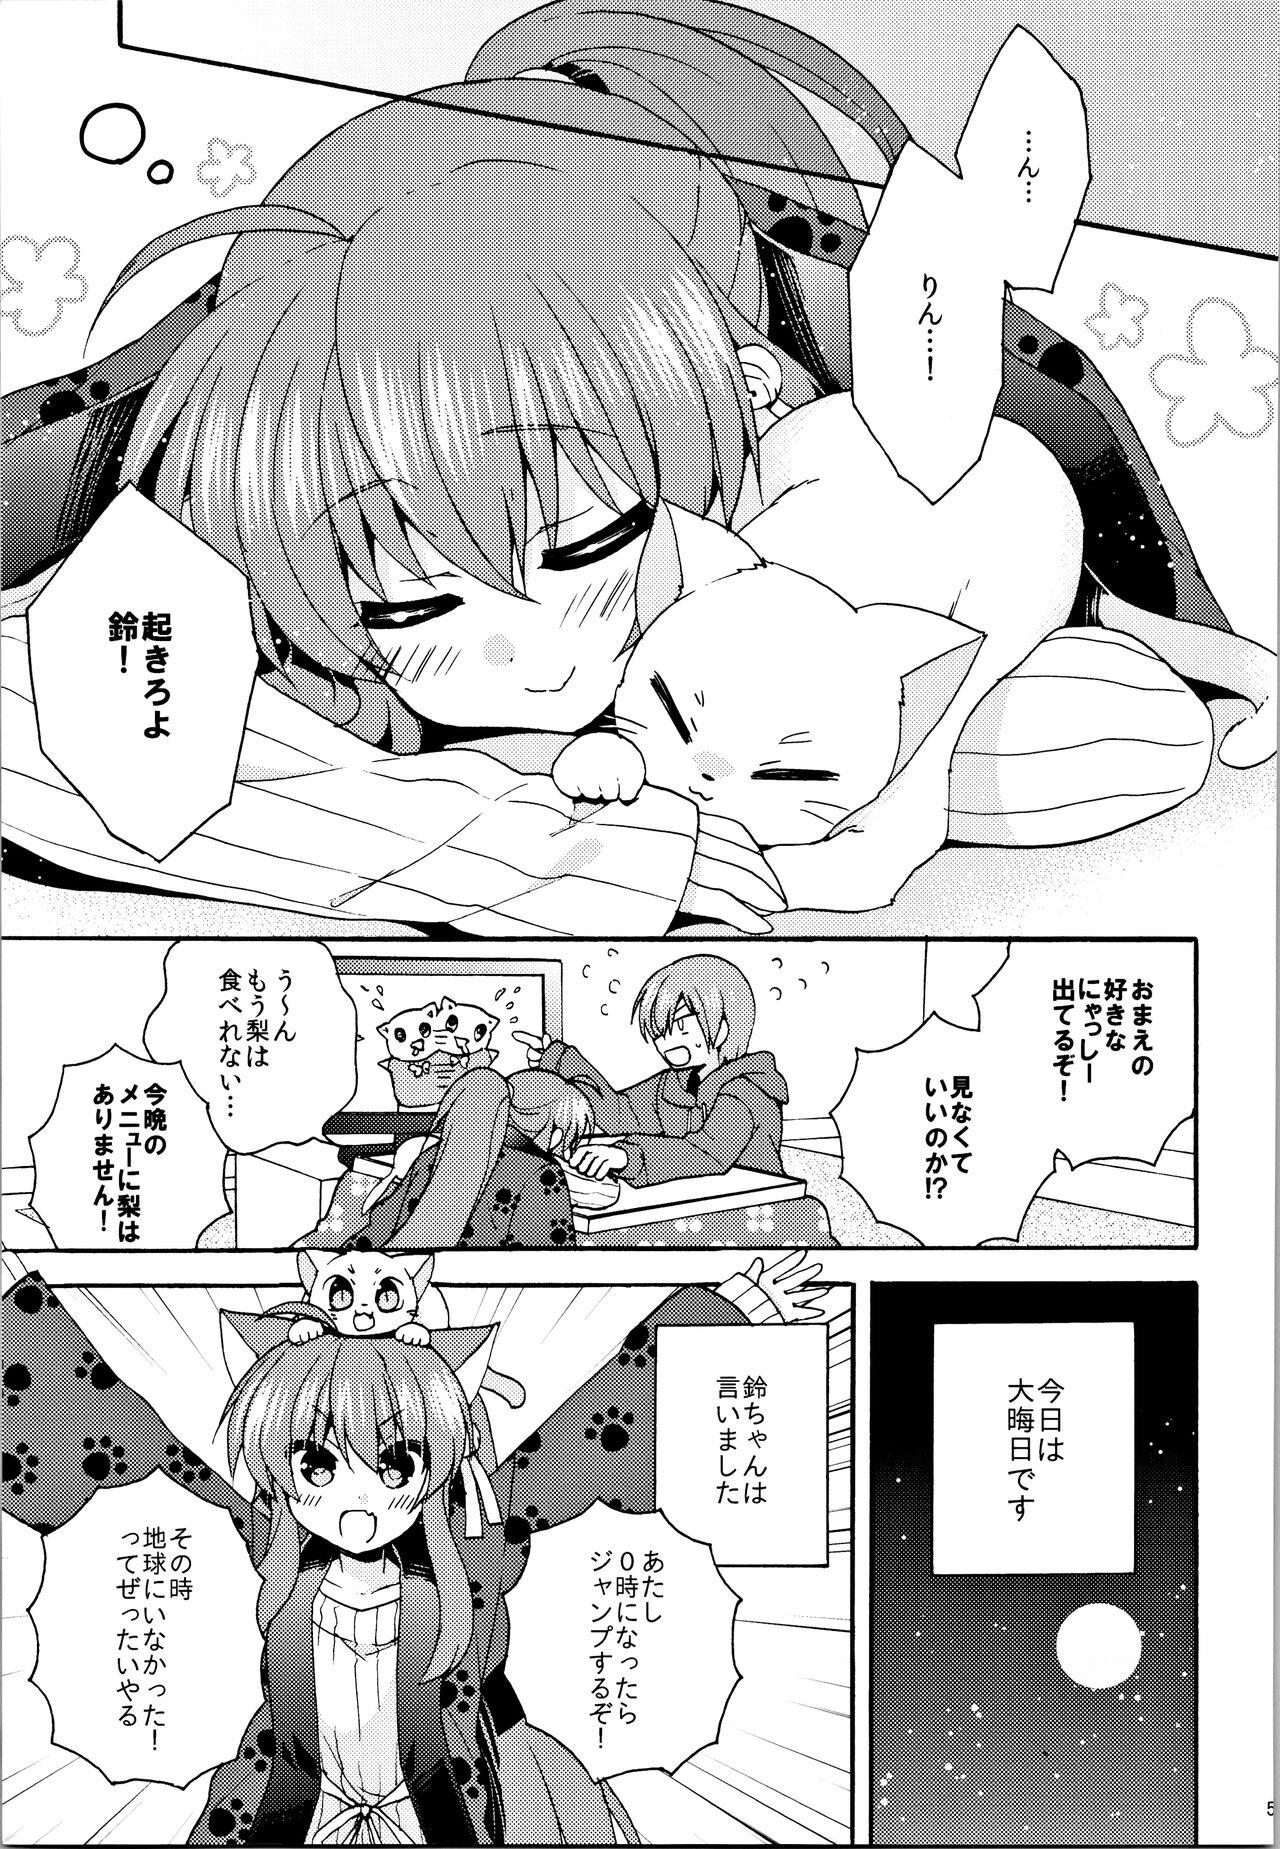 Sislovesme Just A Few More Nights - Little busters Les - Page 4